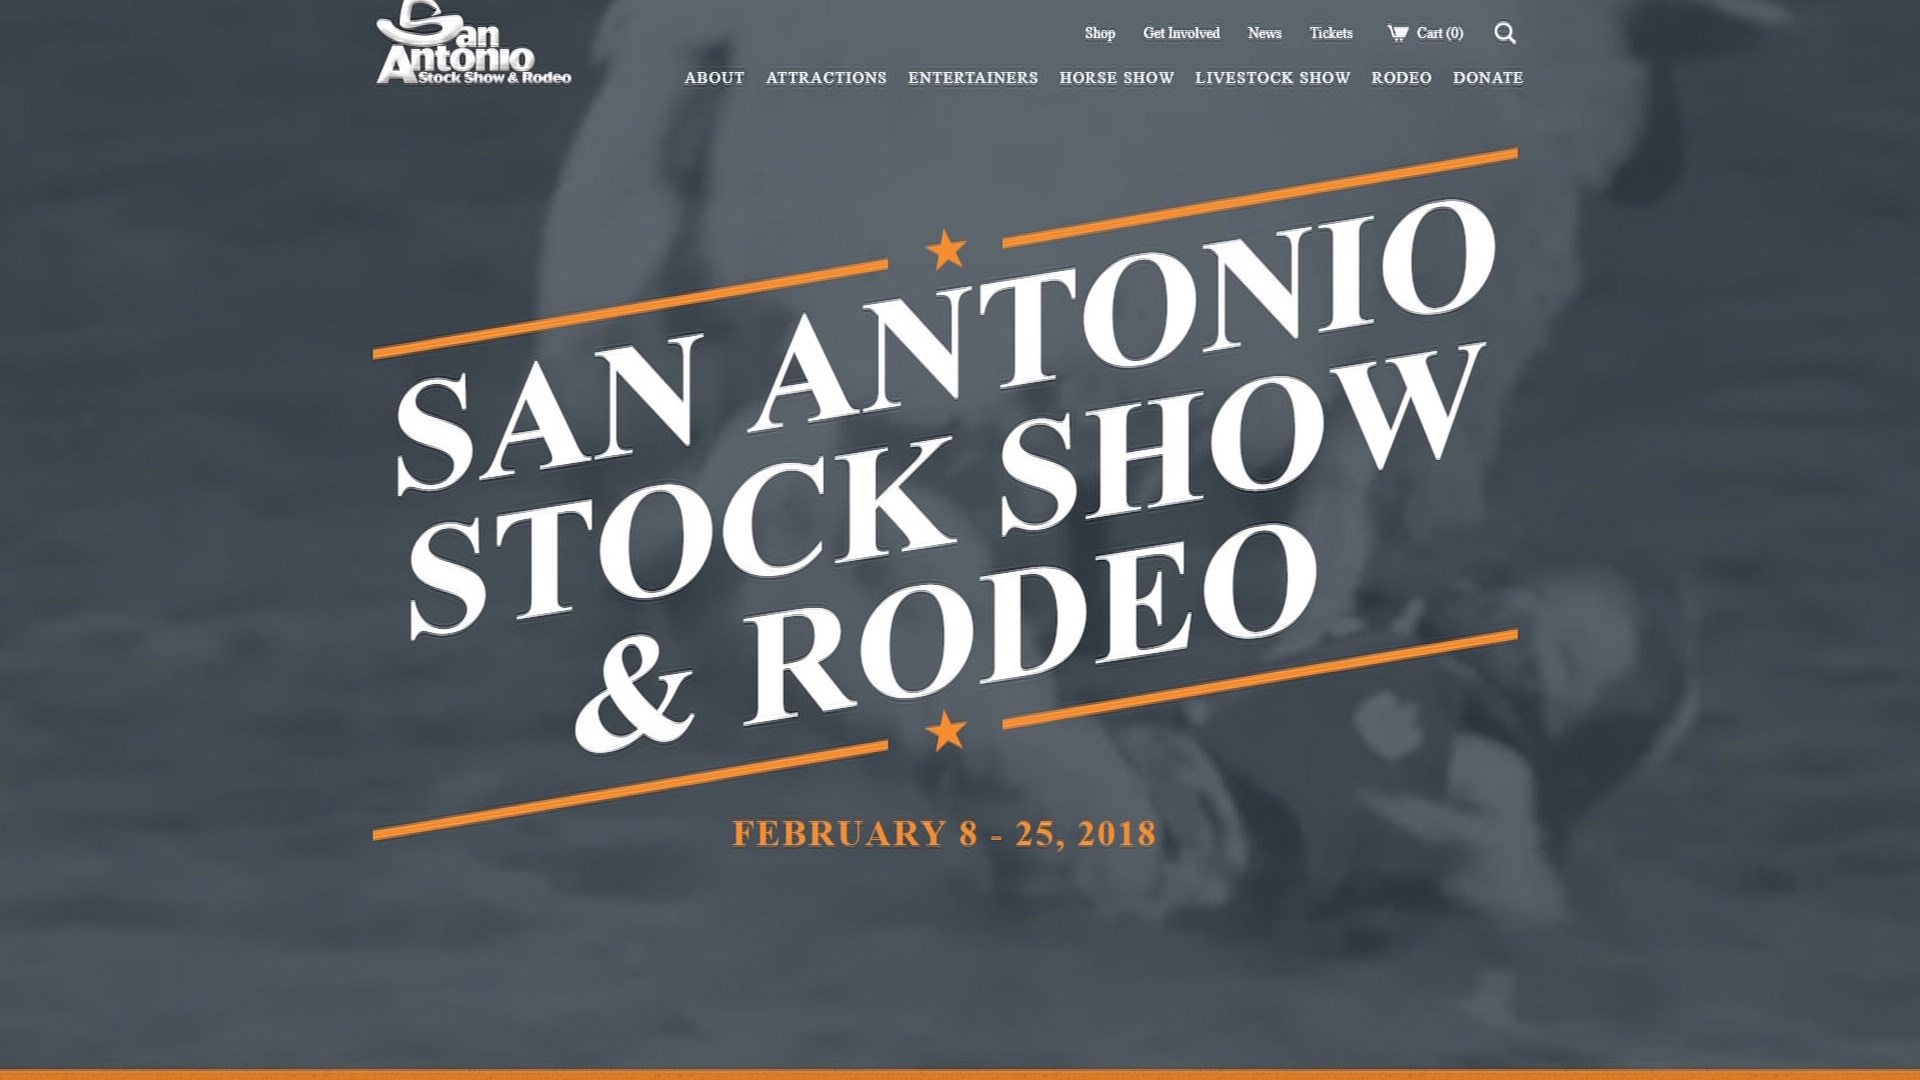 Rodeo ready Simple road map for the San Antonio Rodeo